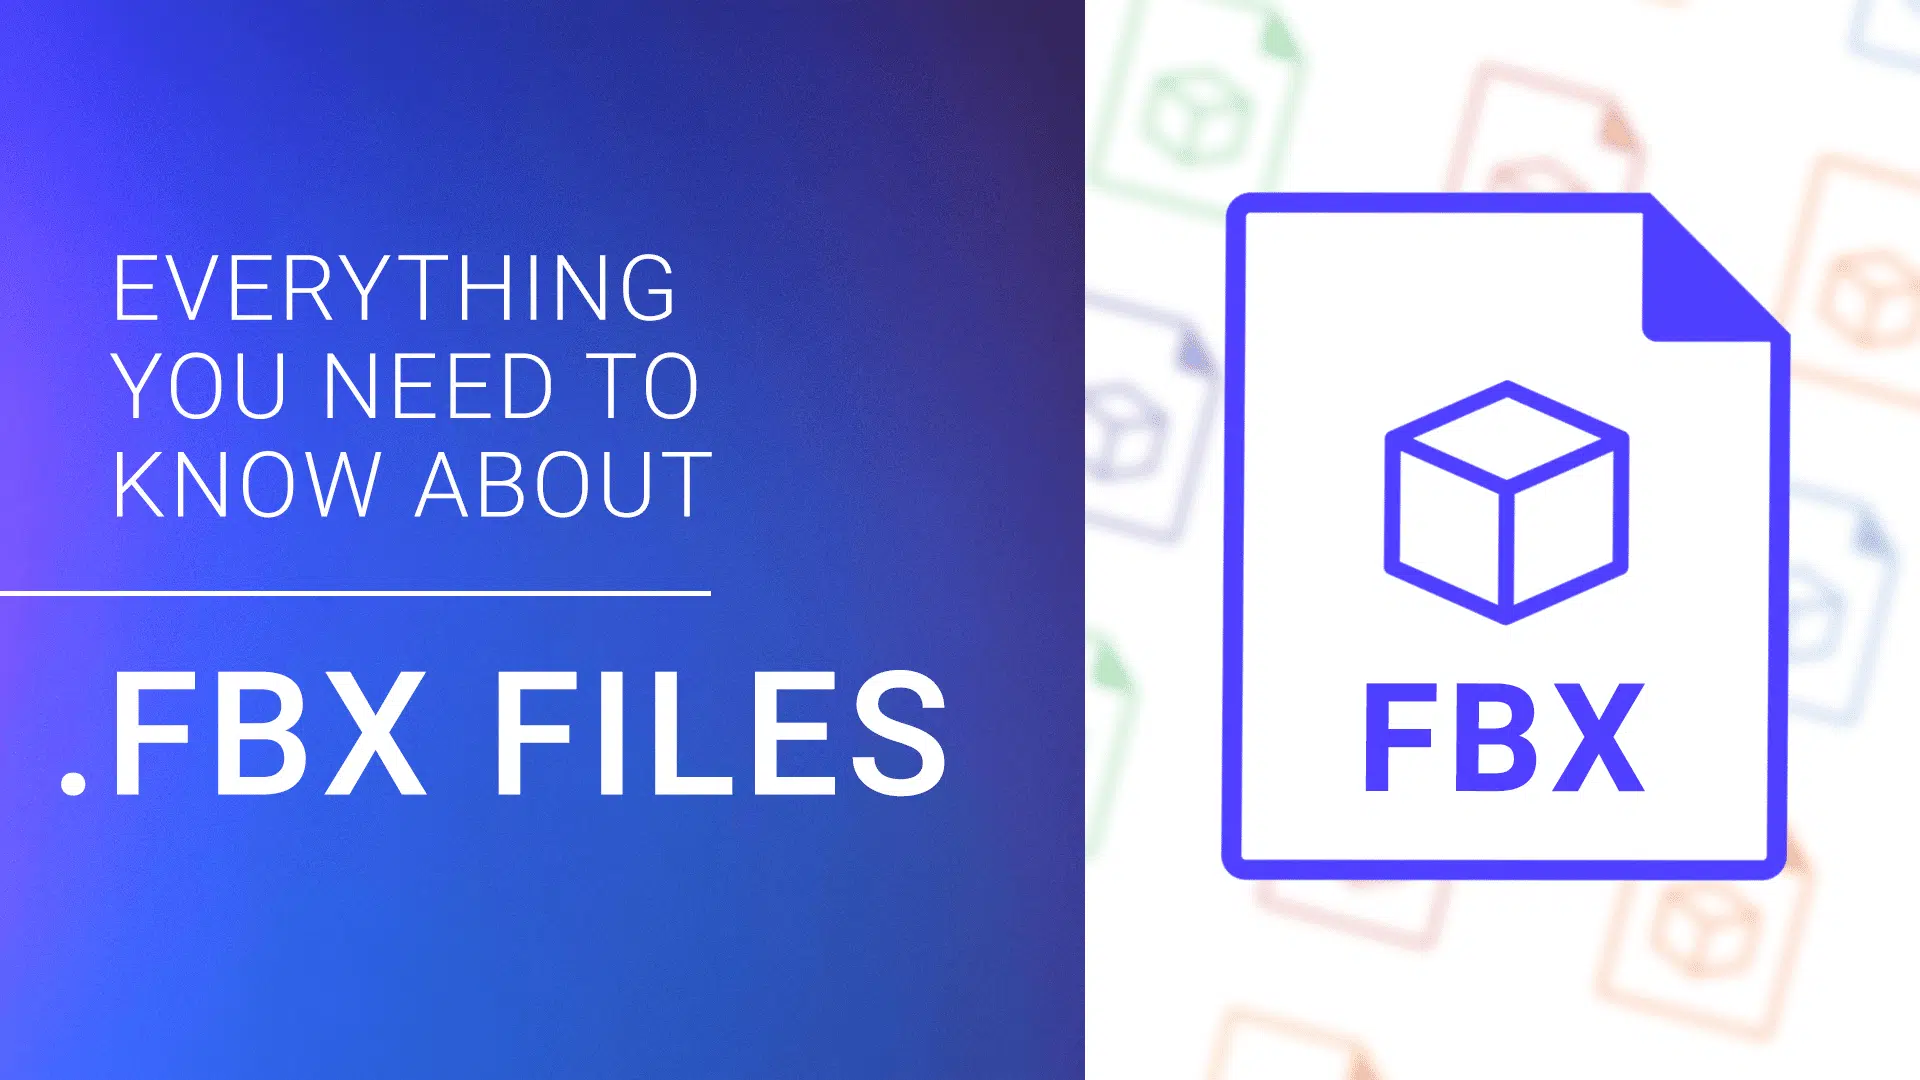 Everything You Need to Know About Using FBX Files